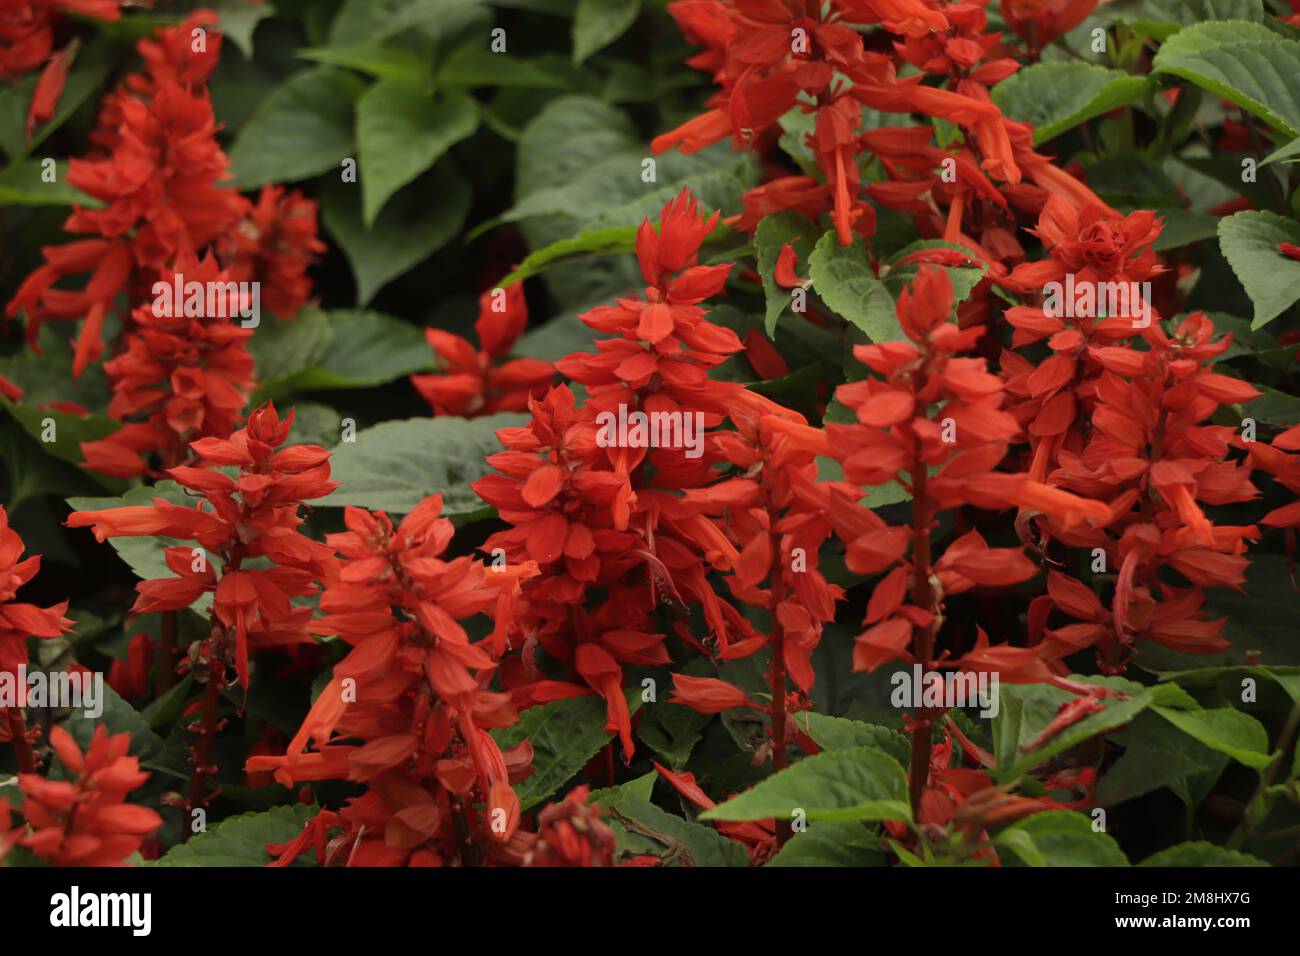 Red Salvia Splendens, Red flower pot plants in the black tray Stock Photo